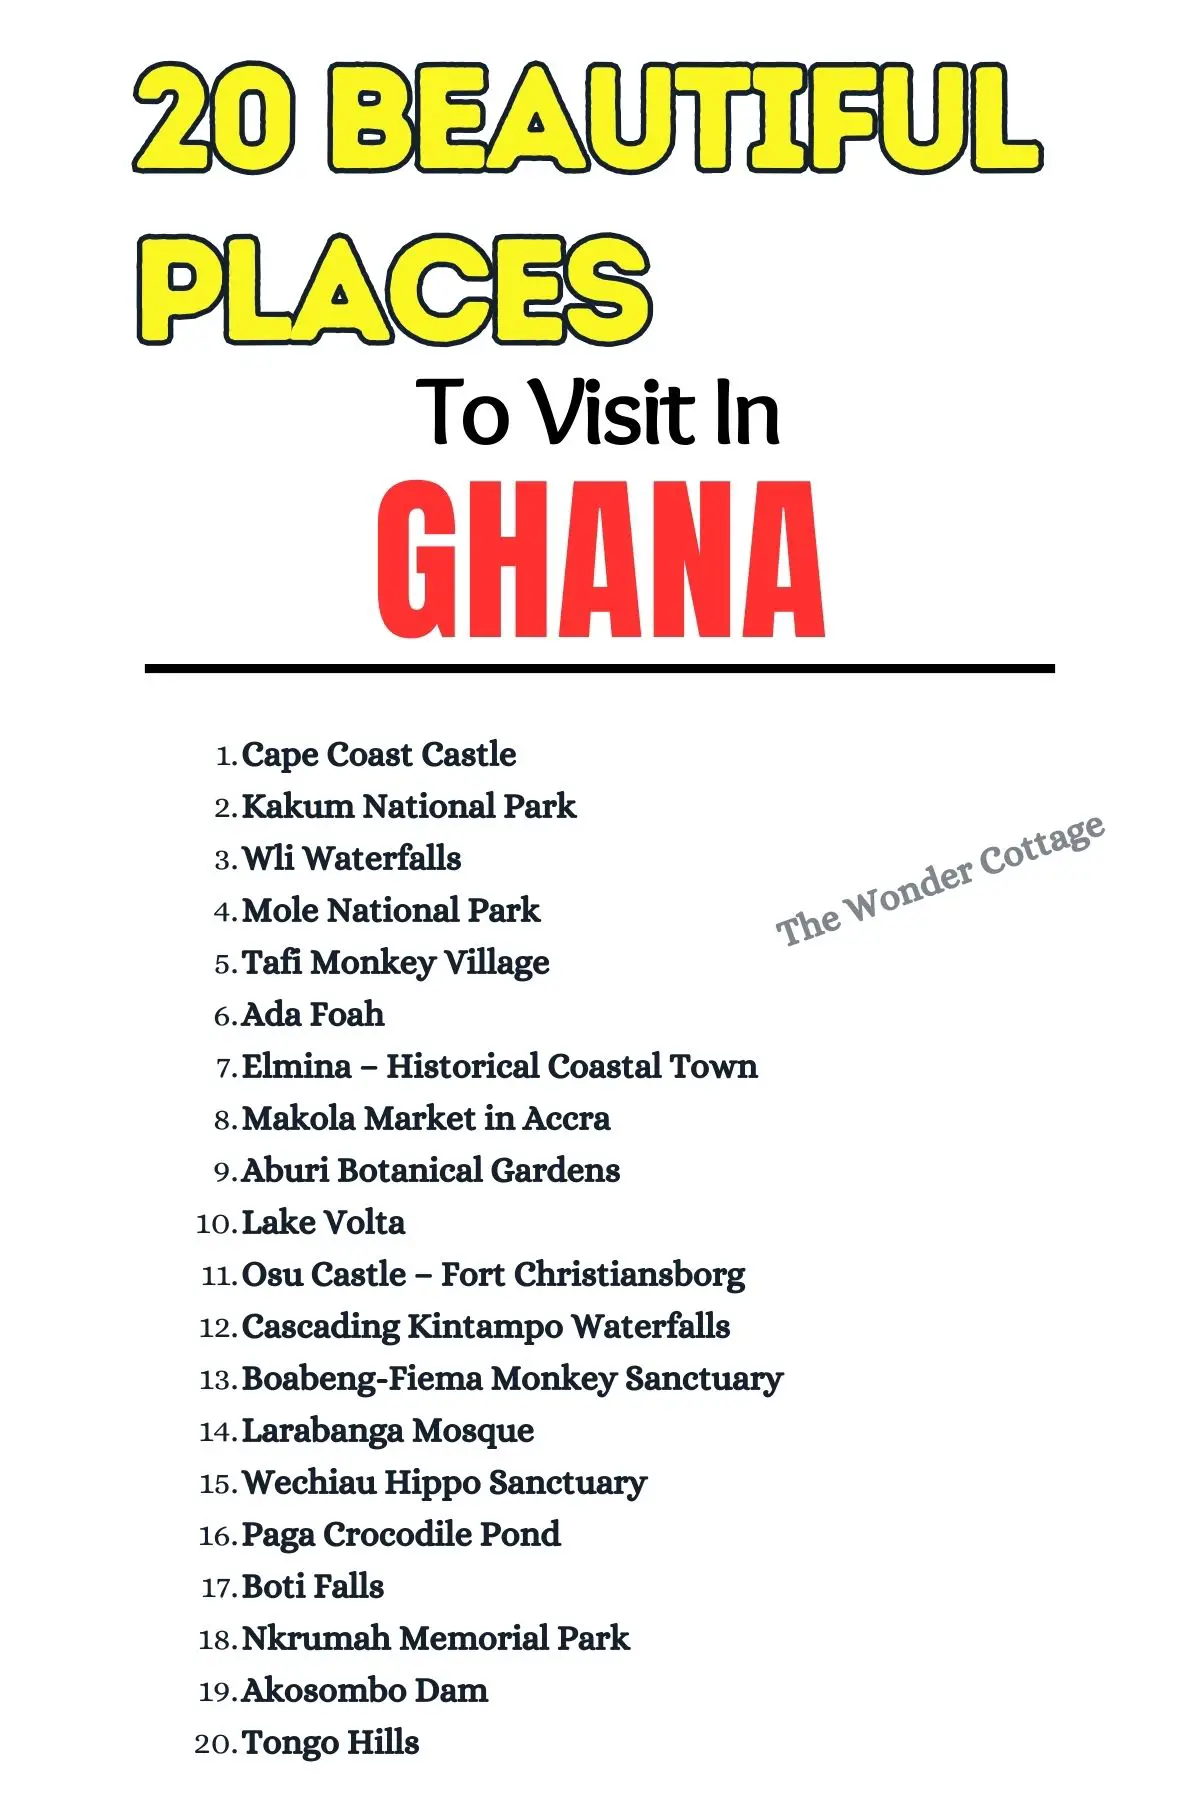 20 Beautiful Places To Visit In Ghana